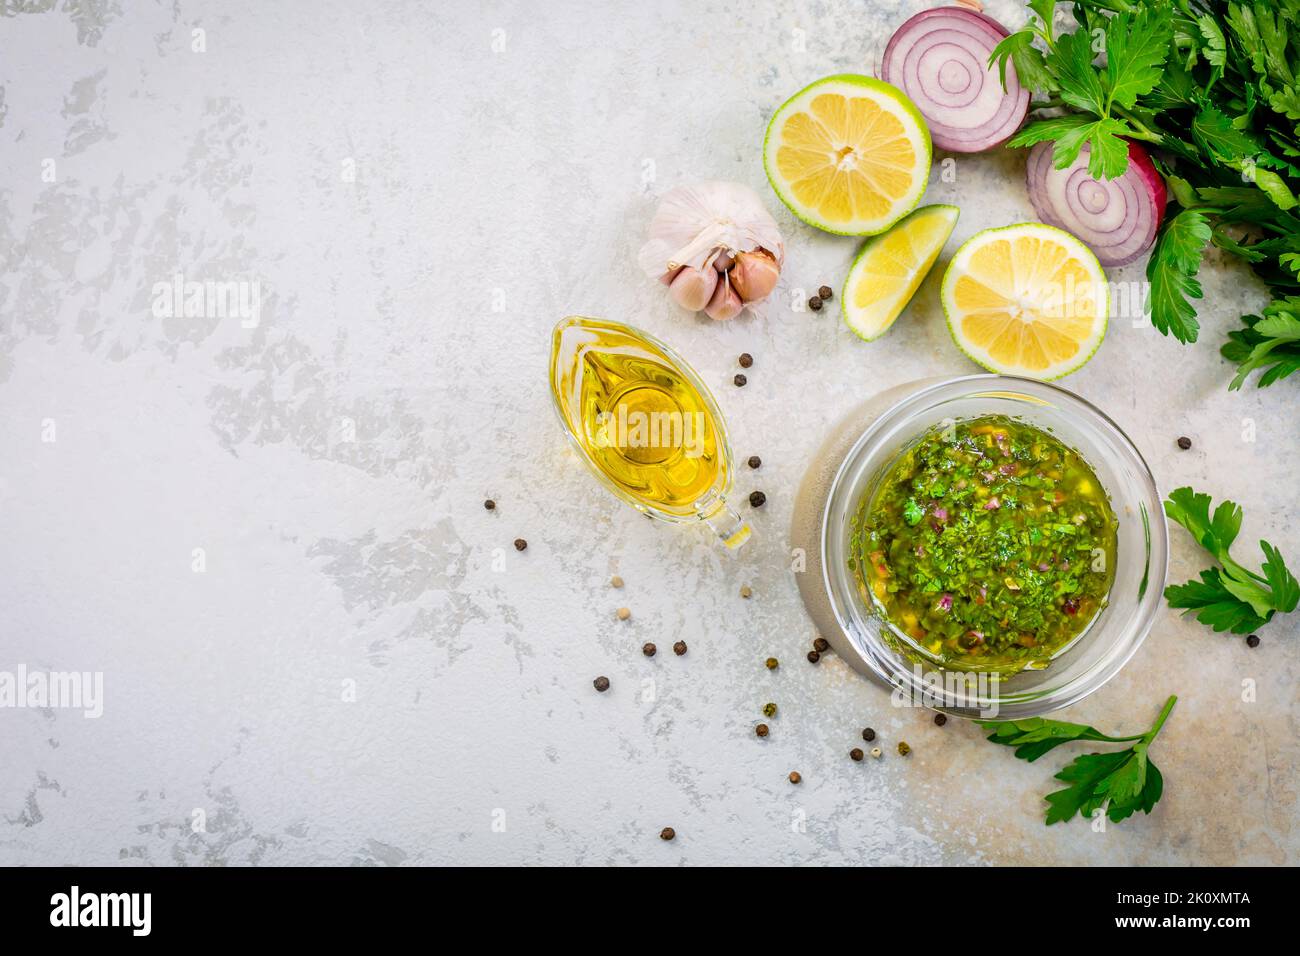 Chimichurri - homemade fresh Latin American sauce made from various herbs, garlic and red wine vinegar. Cooking ingredient or table condiment Stock Photo